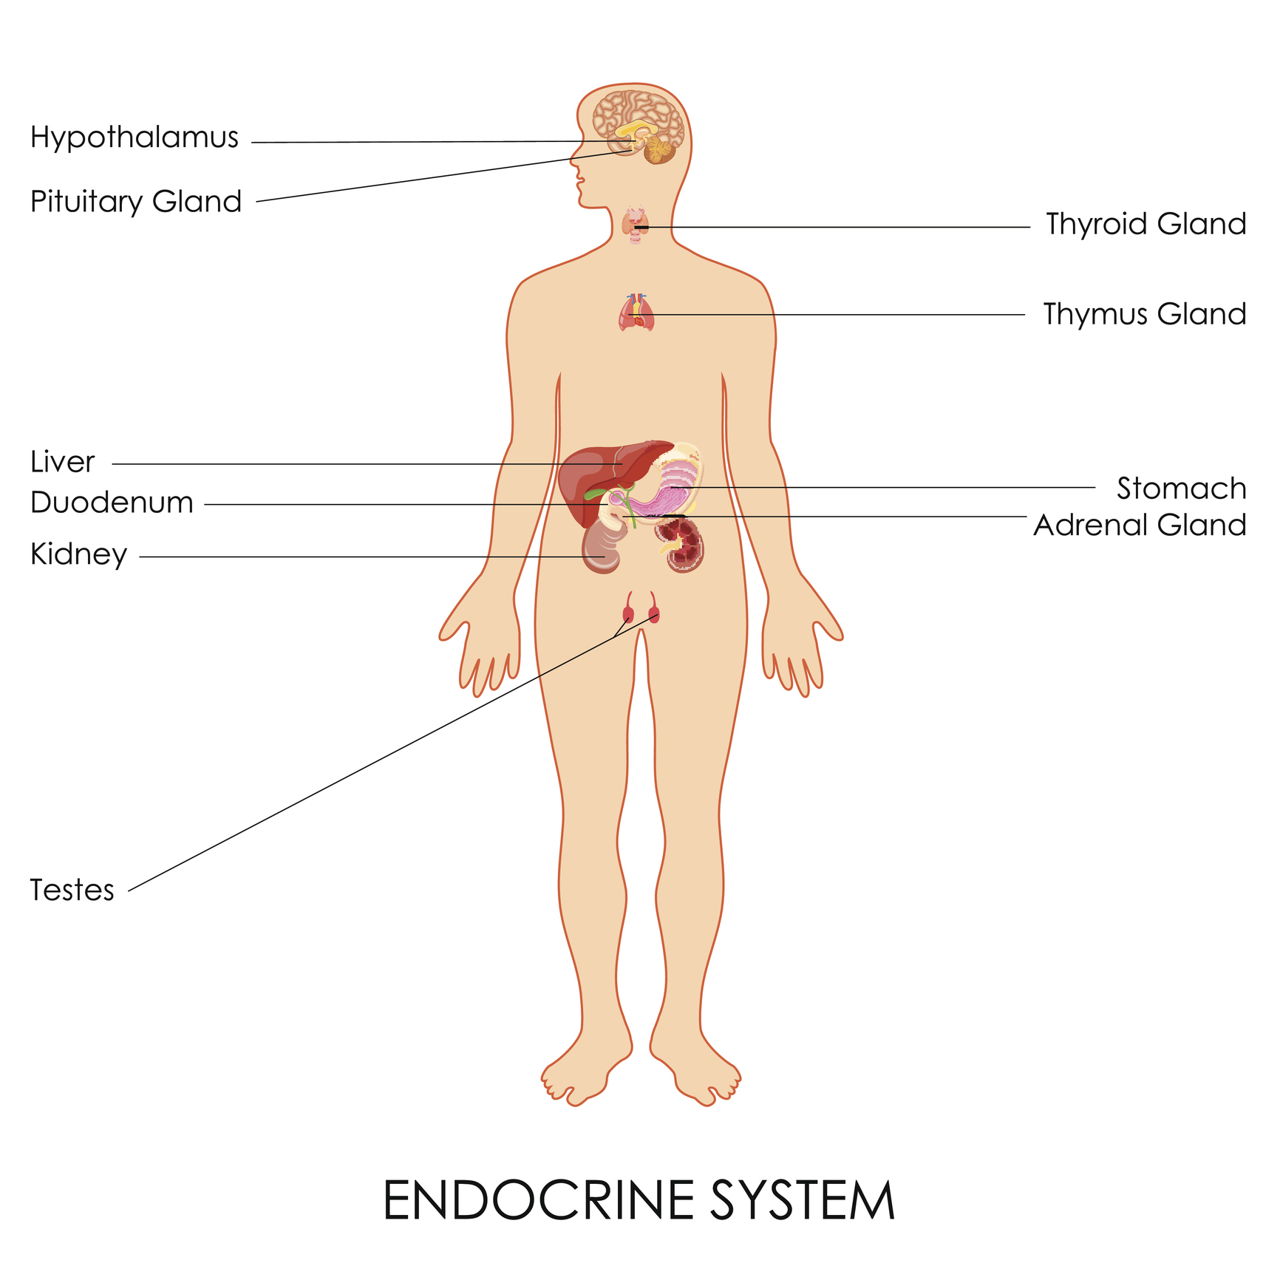 Endocrine Glands and Functions